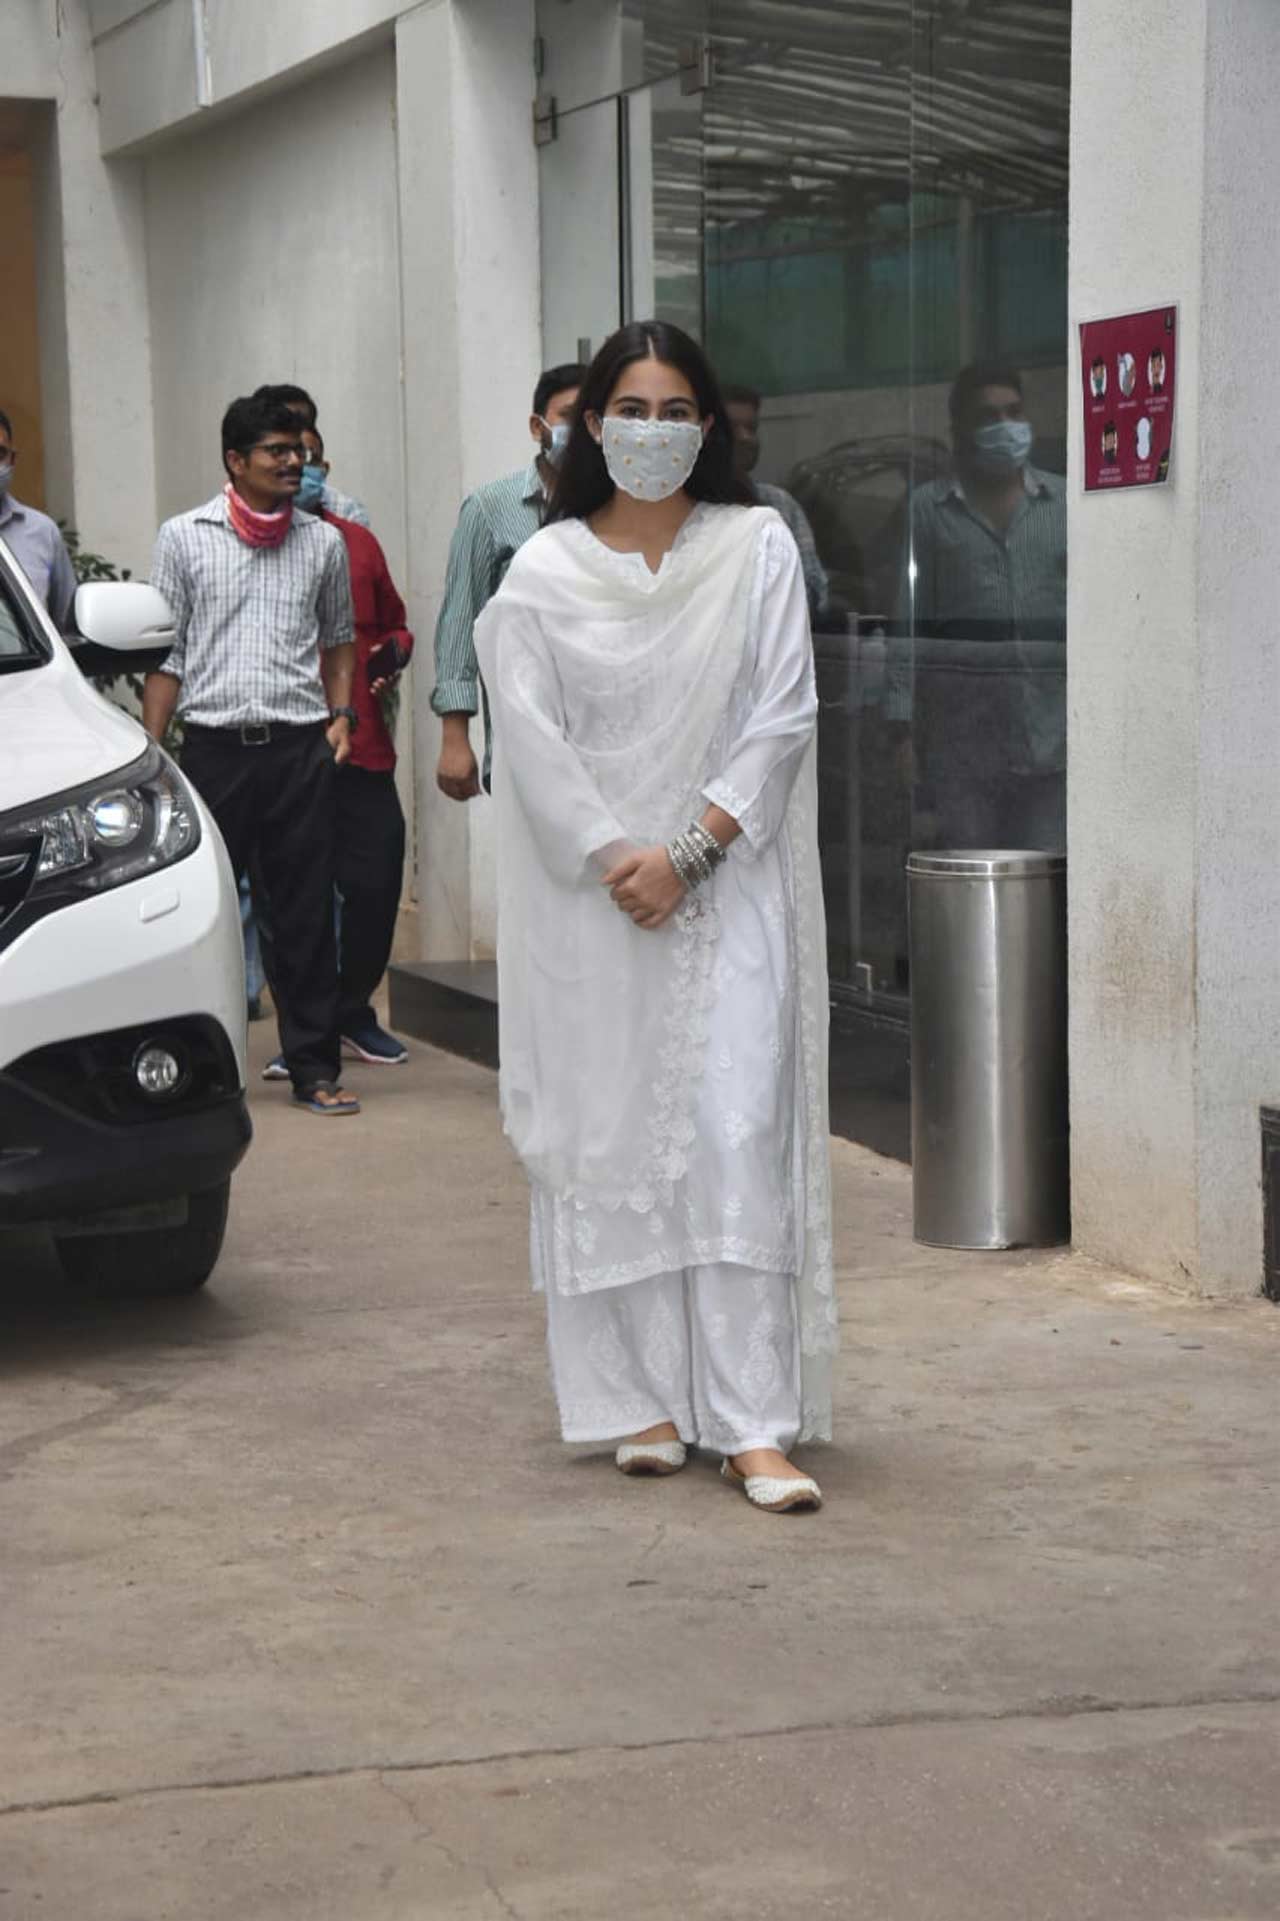 Sara Ali Khan was clicked in a white tradional attire and all masked up. Khan is currently vacationing in Ladakh along with actor Radhika Madan and musician Jasleen Royal. The 'Kedarnath' star's Ladakh diaries have redefined what a truly peaceful vacation looks like. In one of herInstagram posts, on Saturday, Sara shared a string of images and video clips from the trip. 